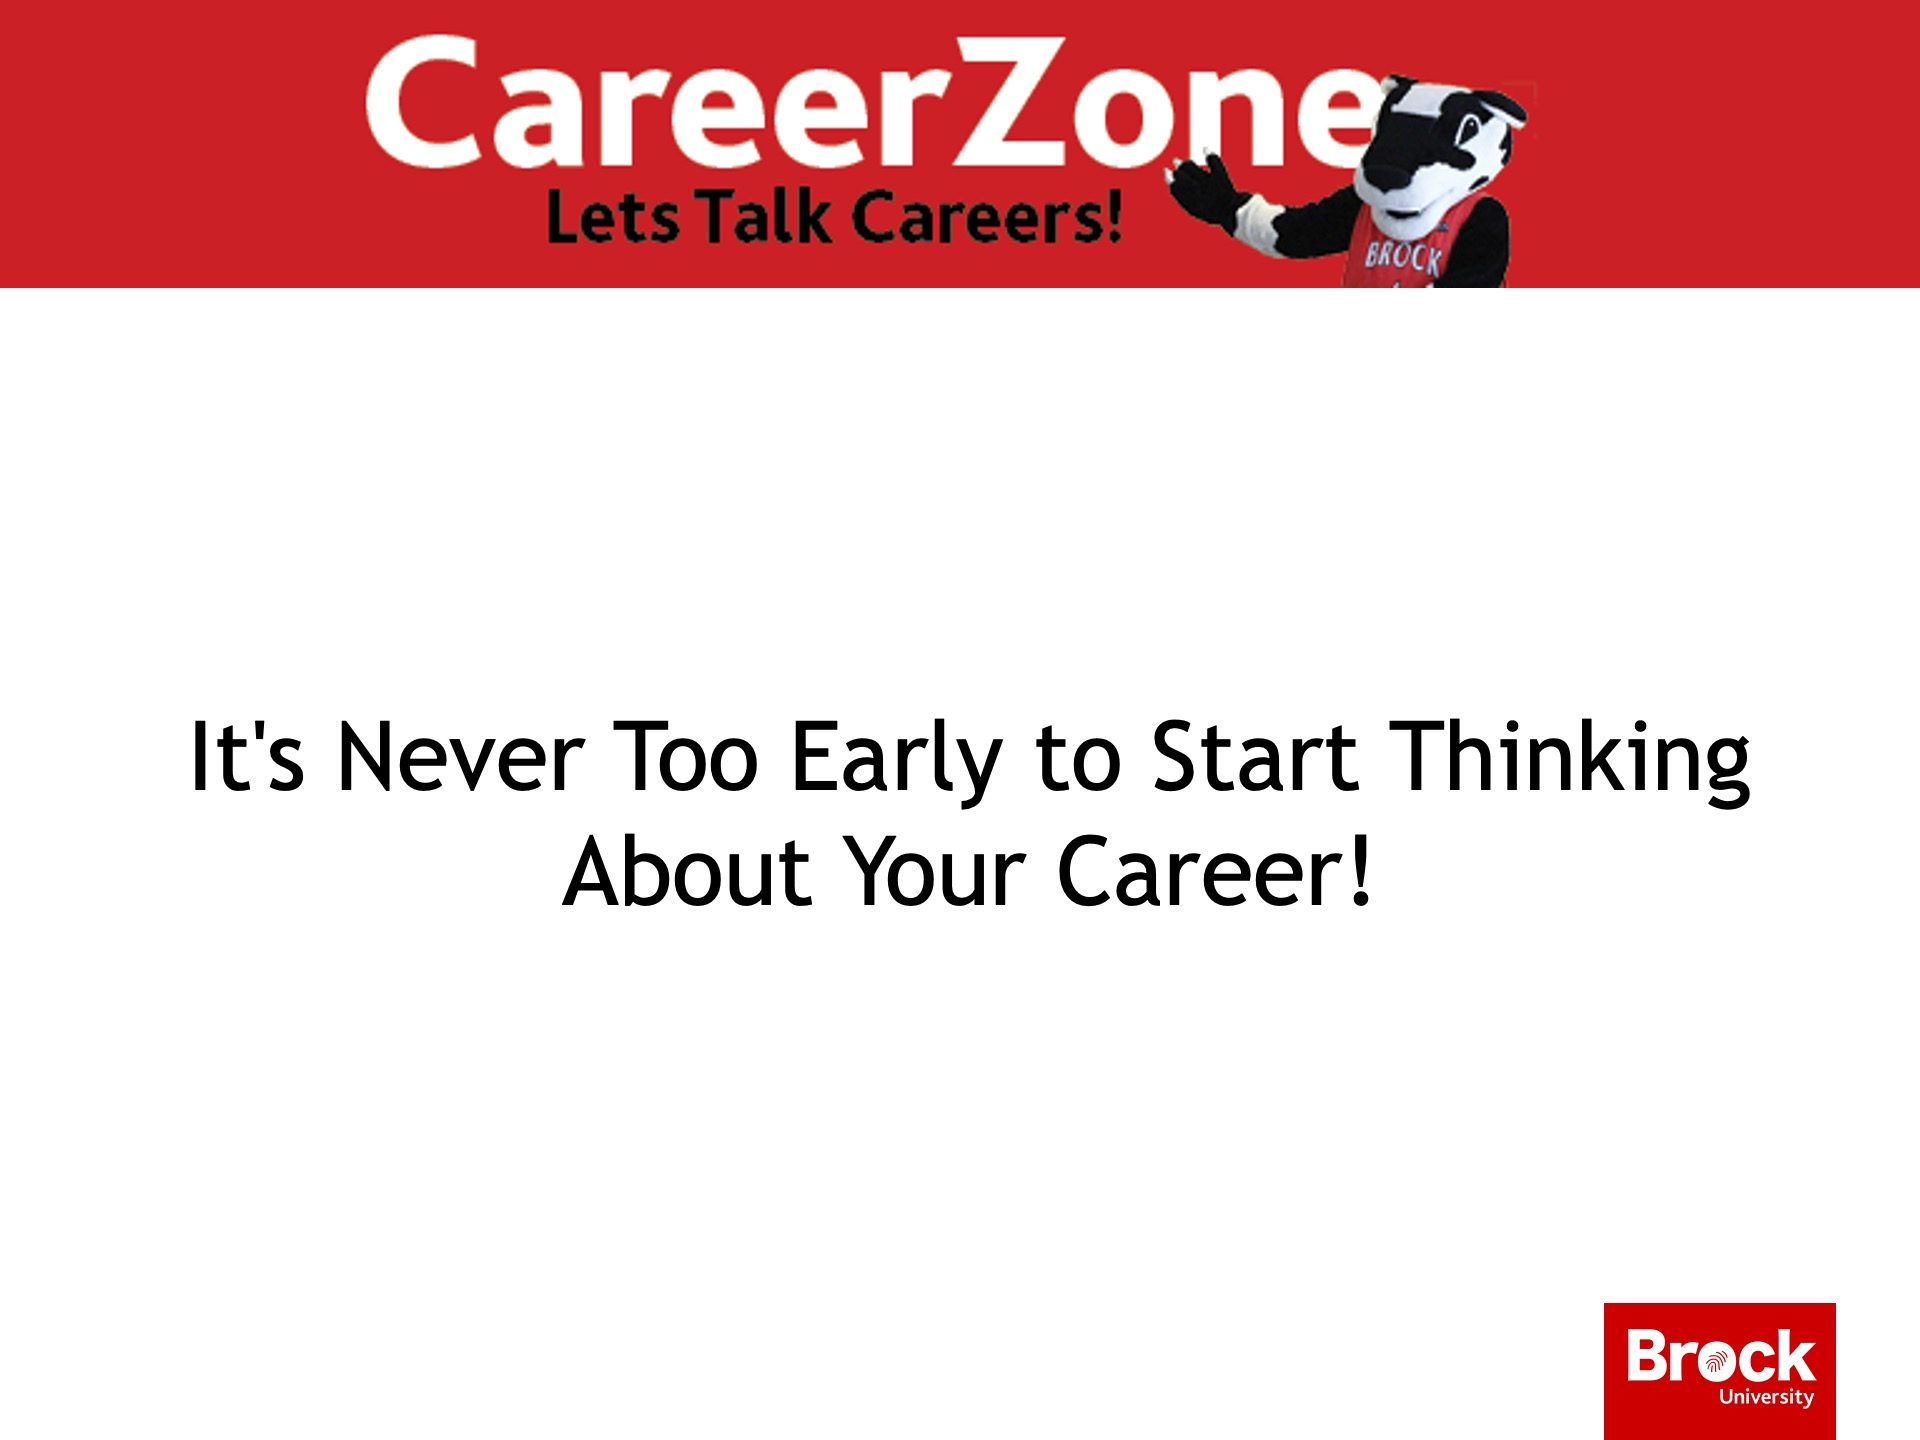 It's never too early to start thinking about your career